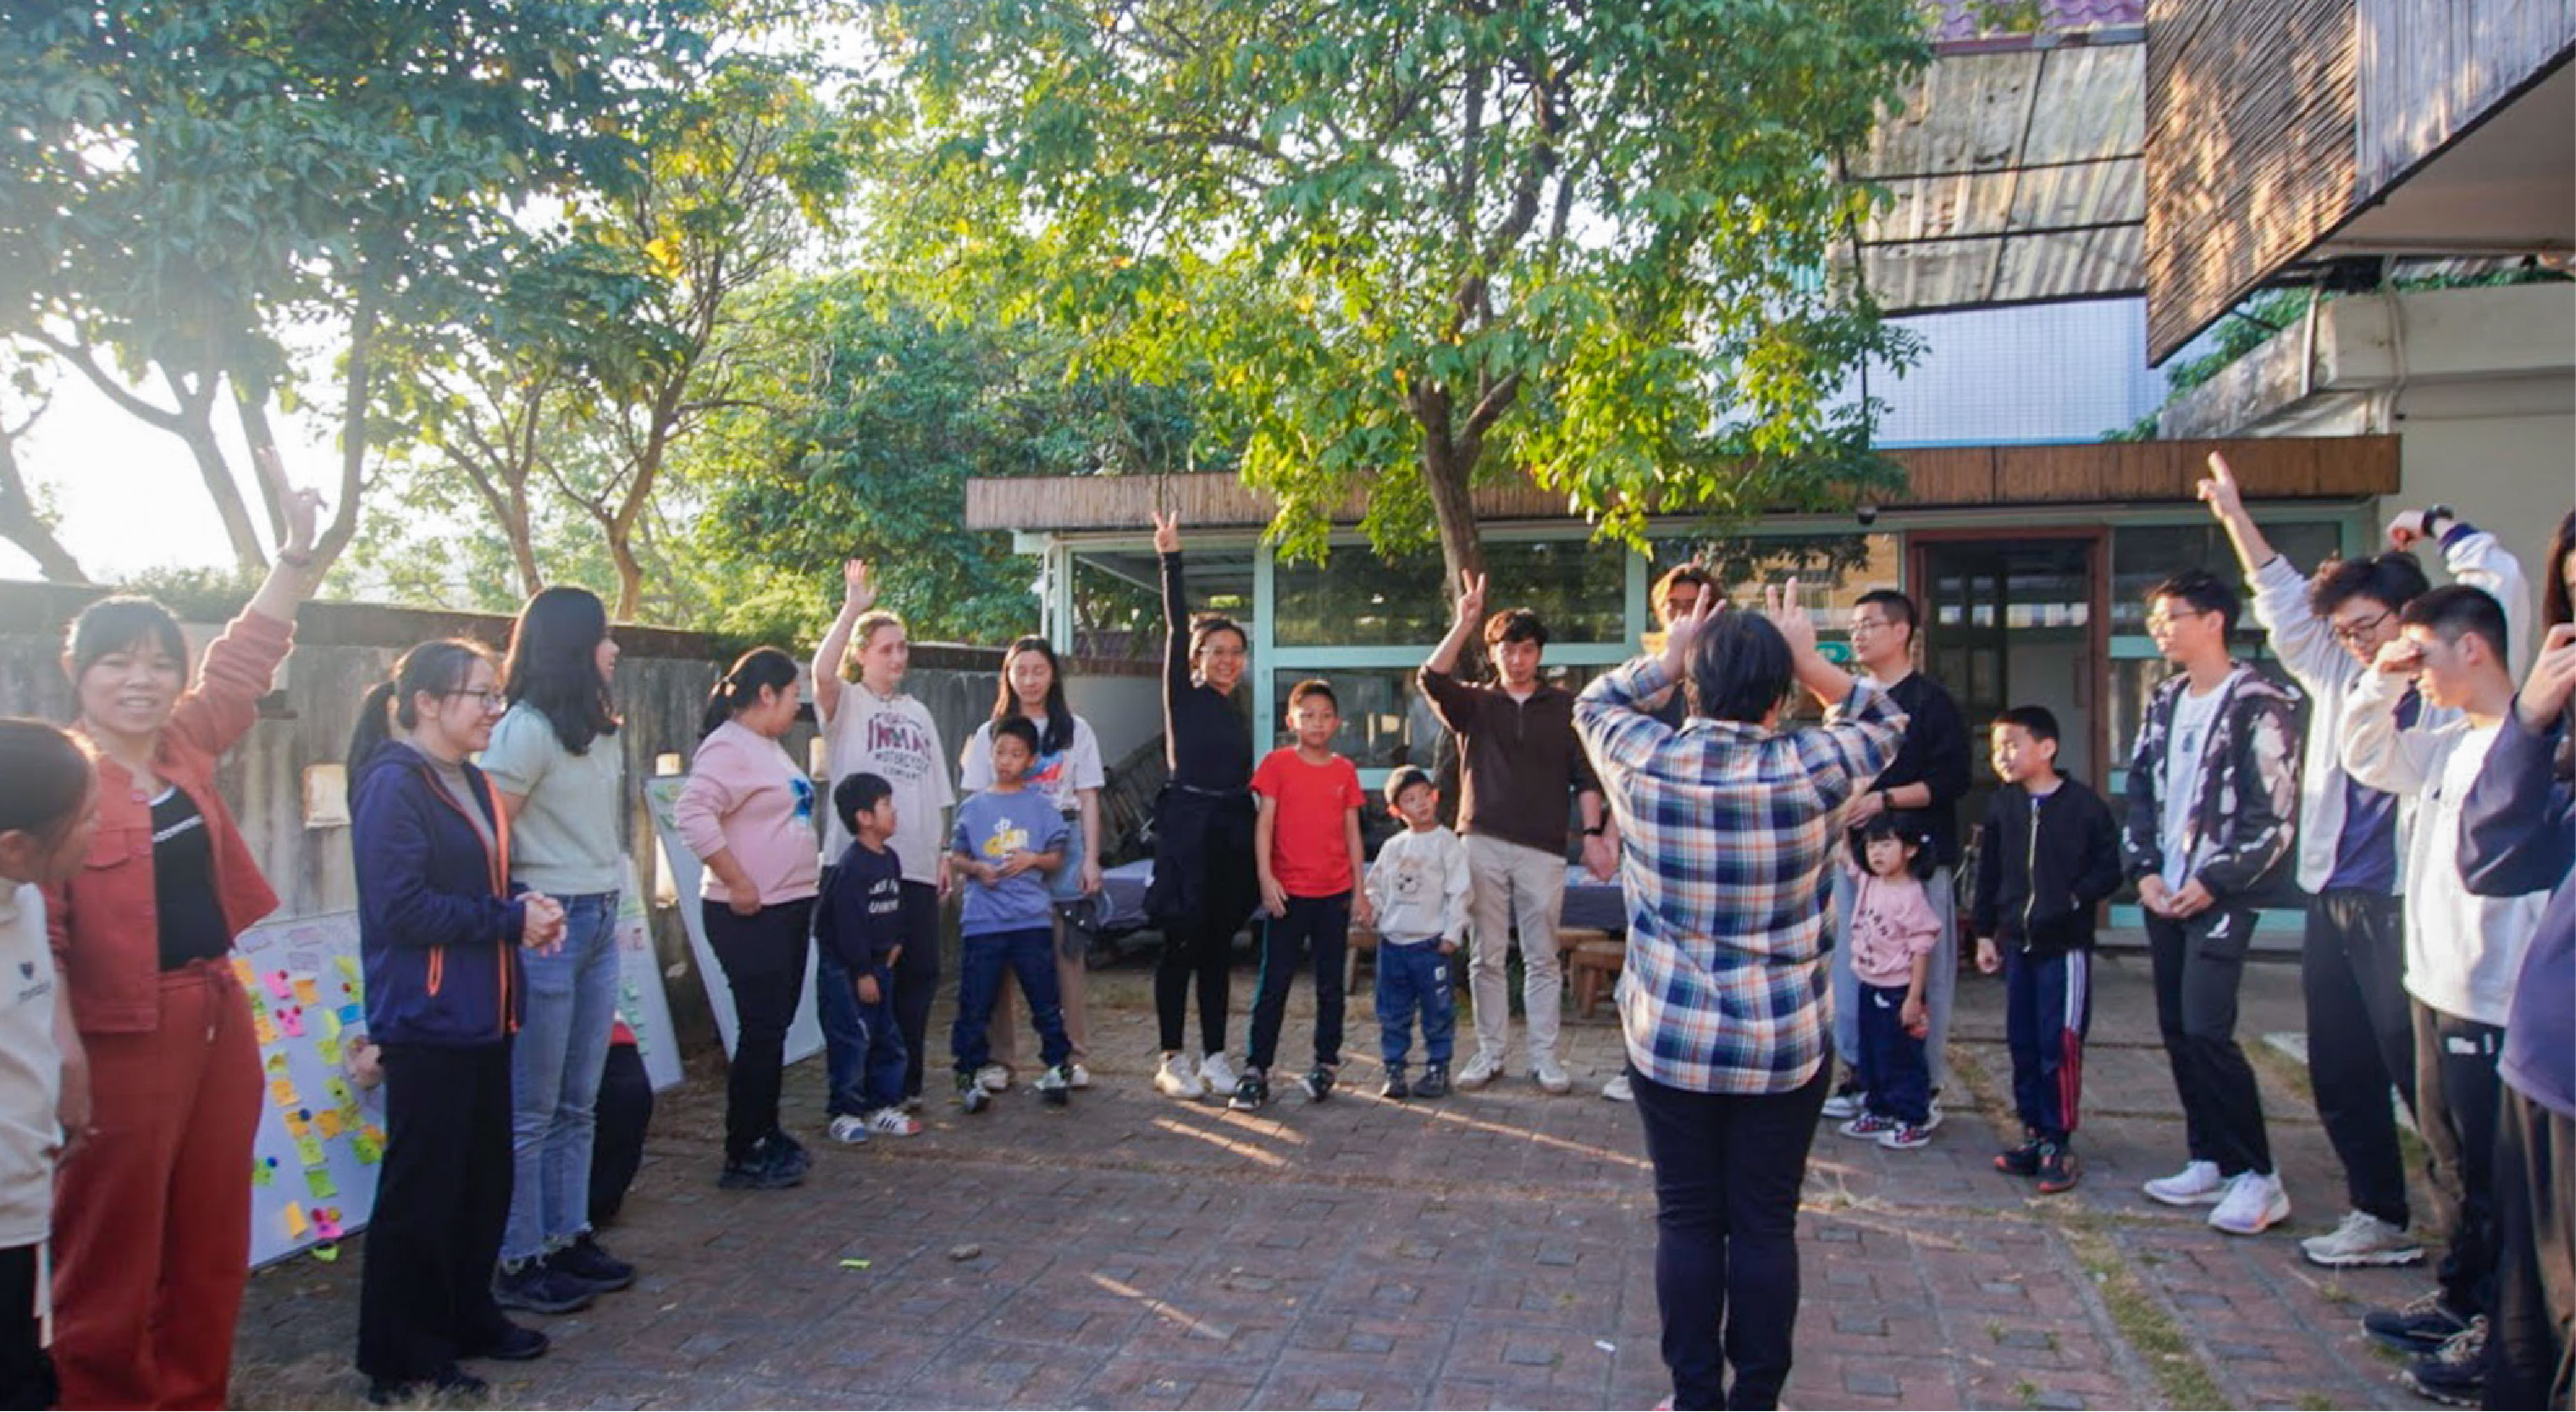 Students taking part in an interactive group activity outside in Guangdong Province.